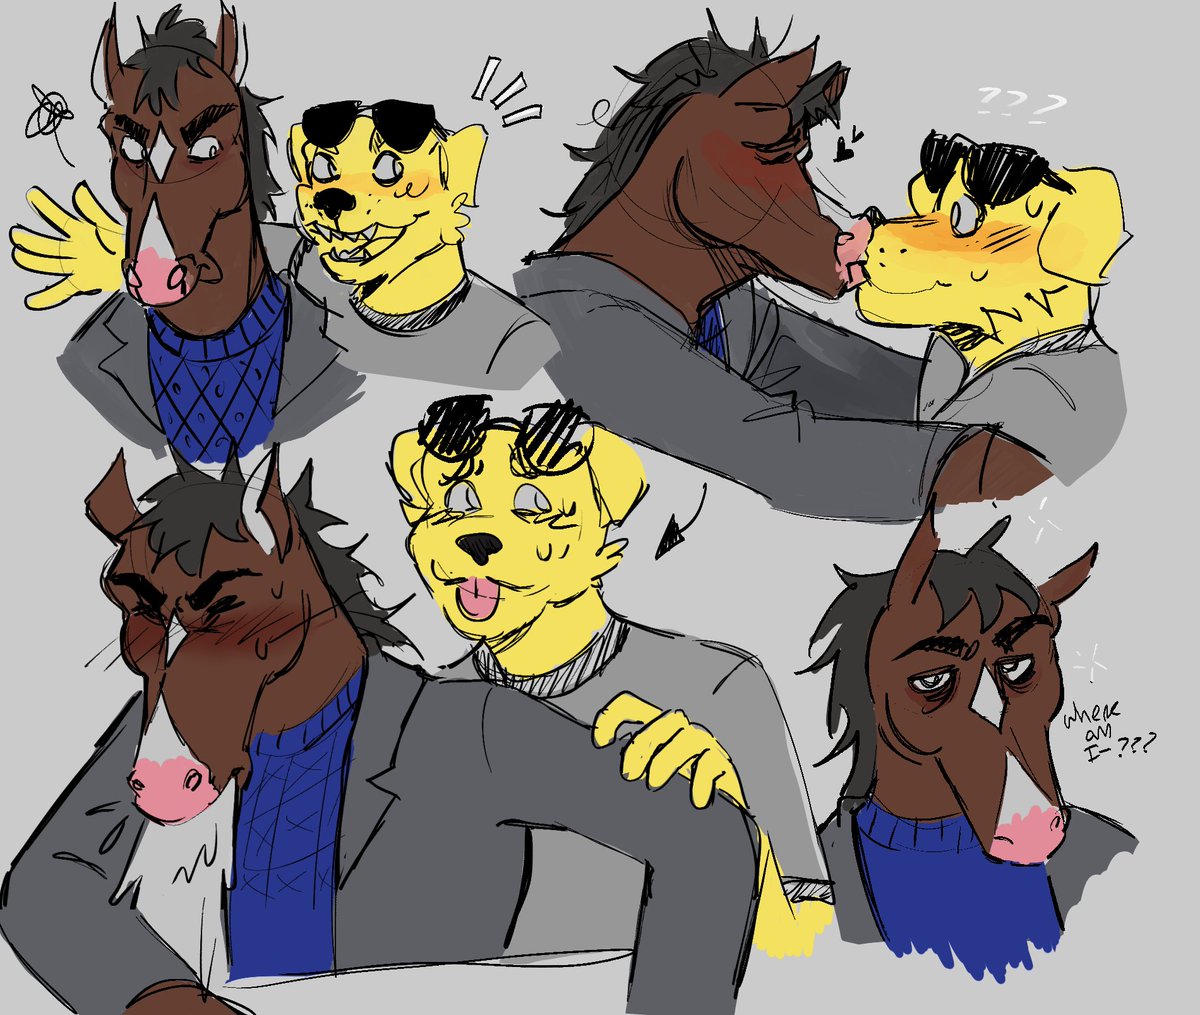 #bojackhorseman #bojack #mrpeanutbutter #bobutter (funny ship name) 
you'll never guess what show I'm rewatching for the 5th time